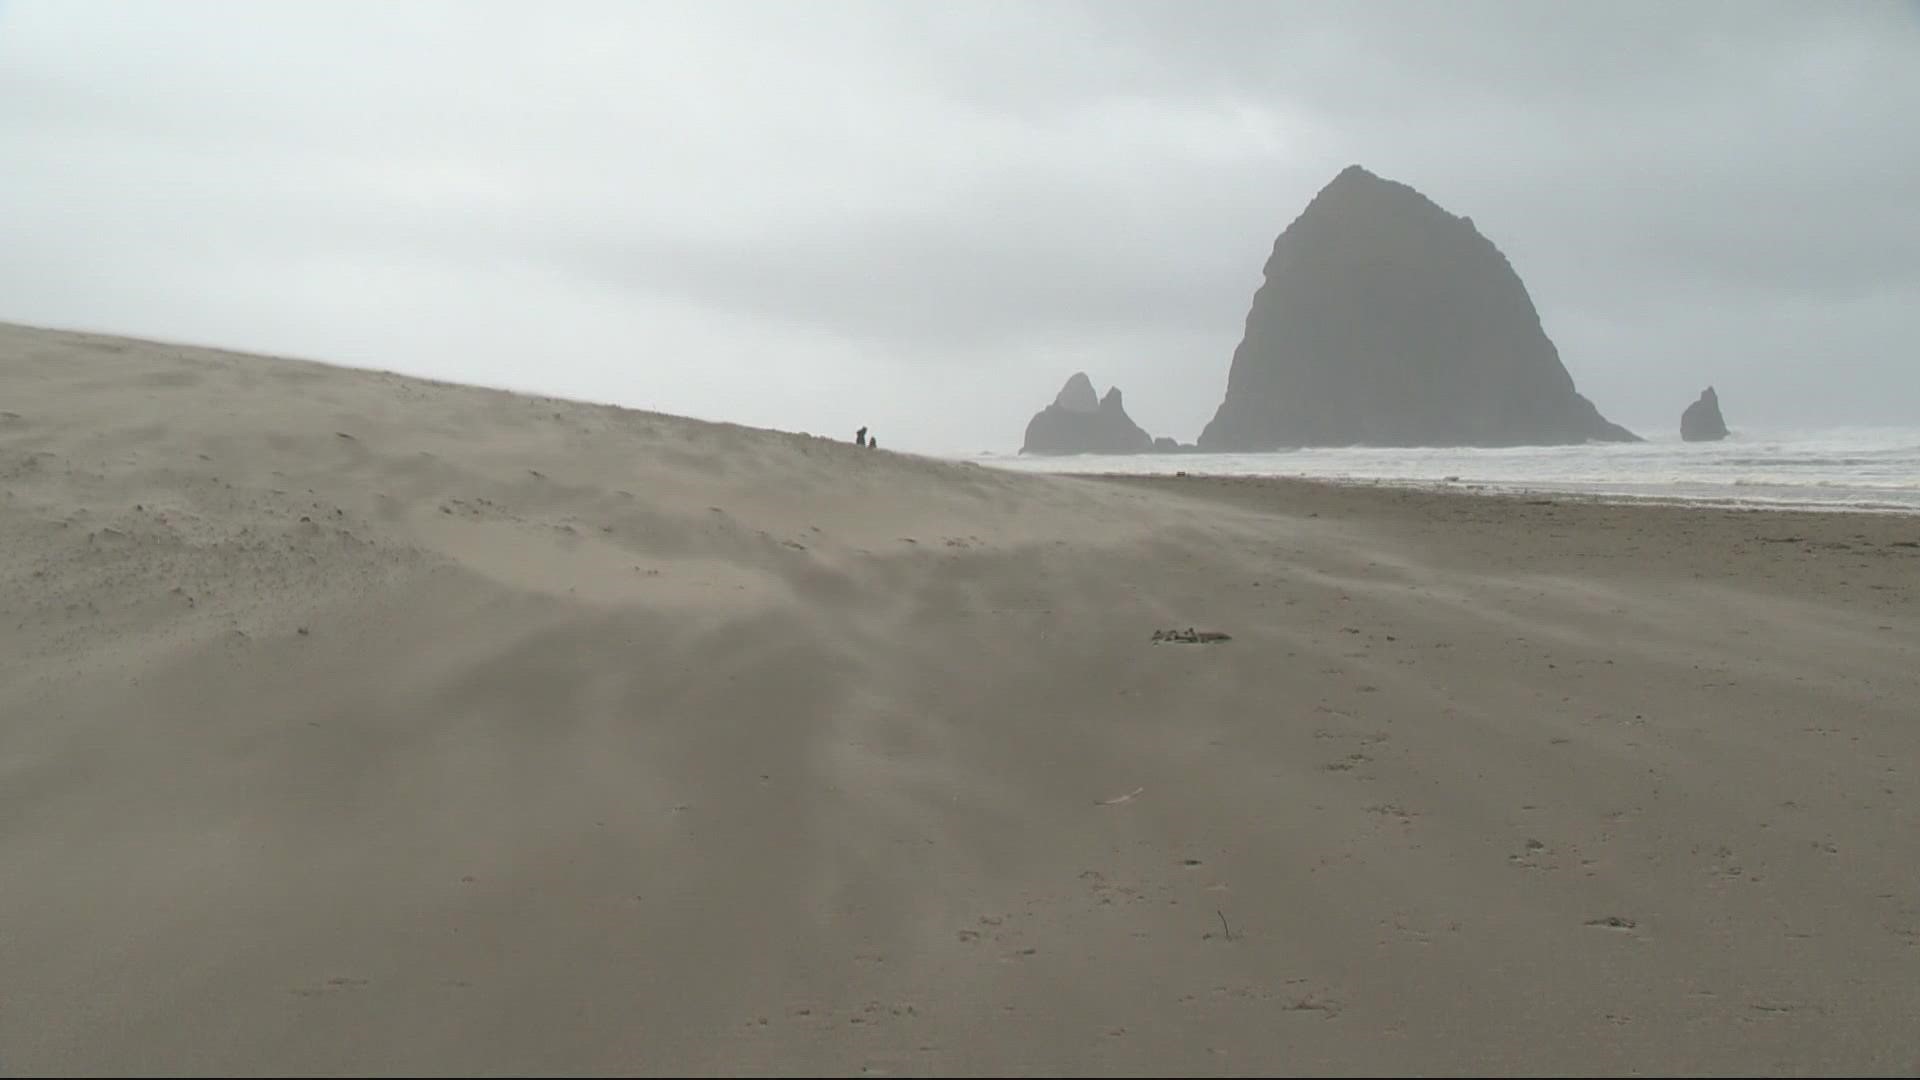 A record-low pressure system brought heavy wind and soaking rain up and down the west coast. Oregon coast residents and visitors recount the spectacle.